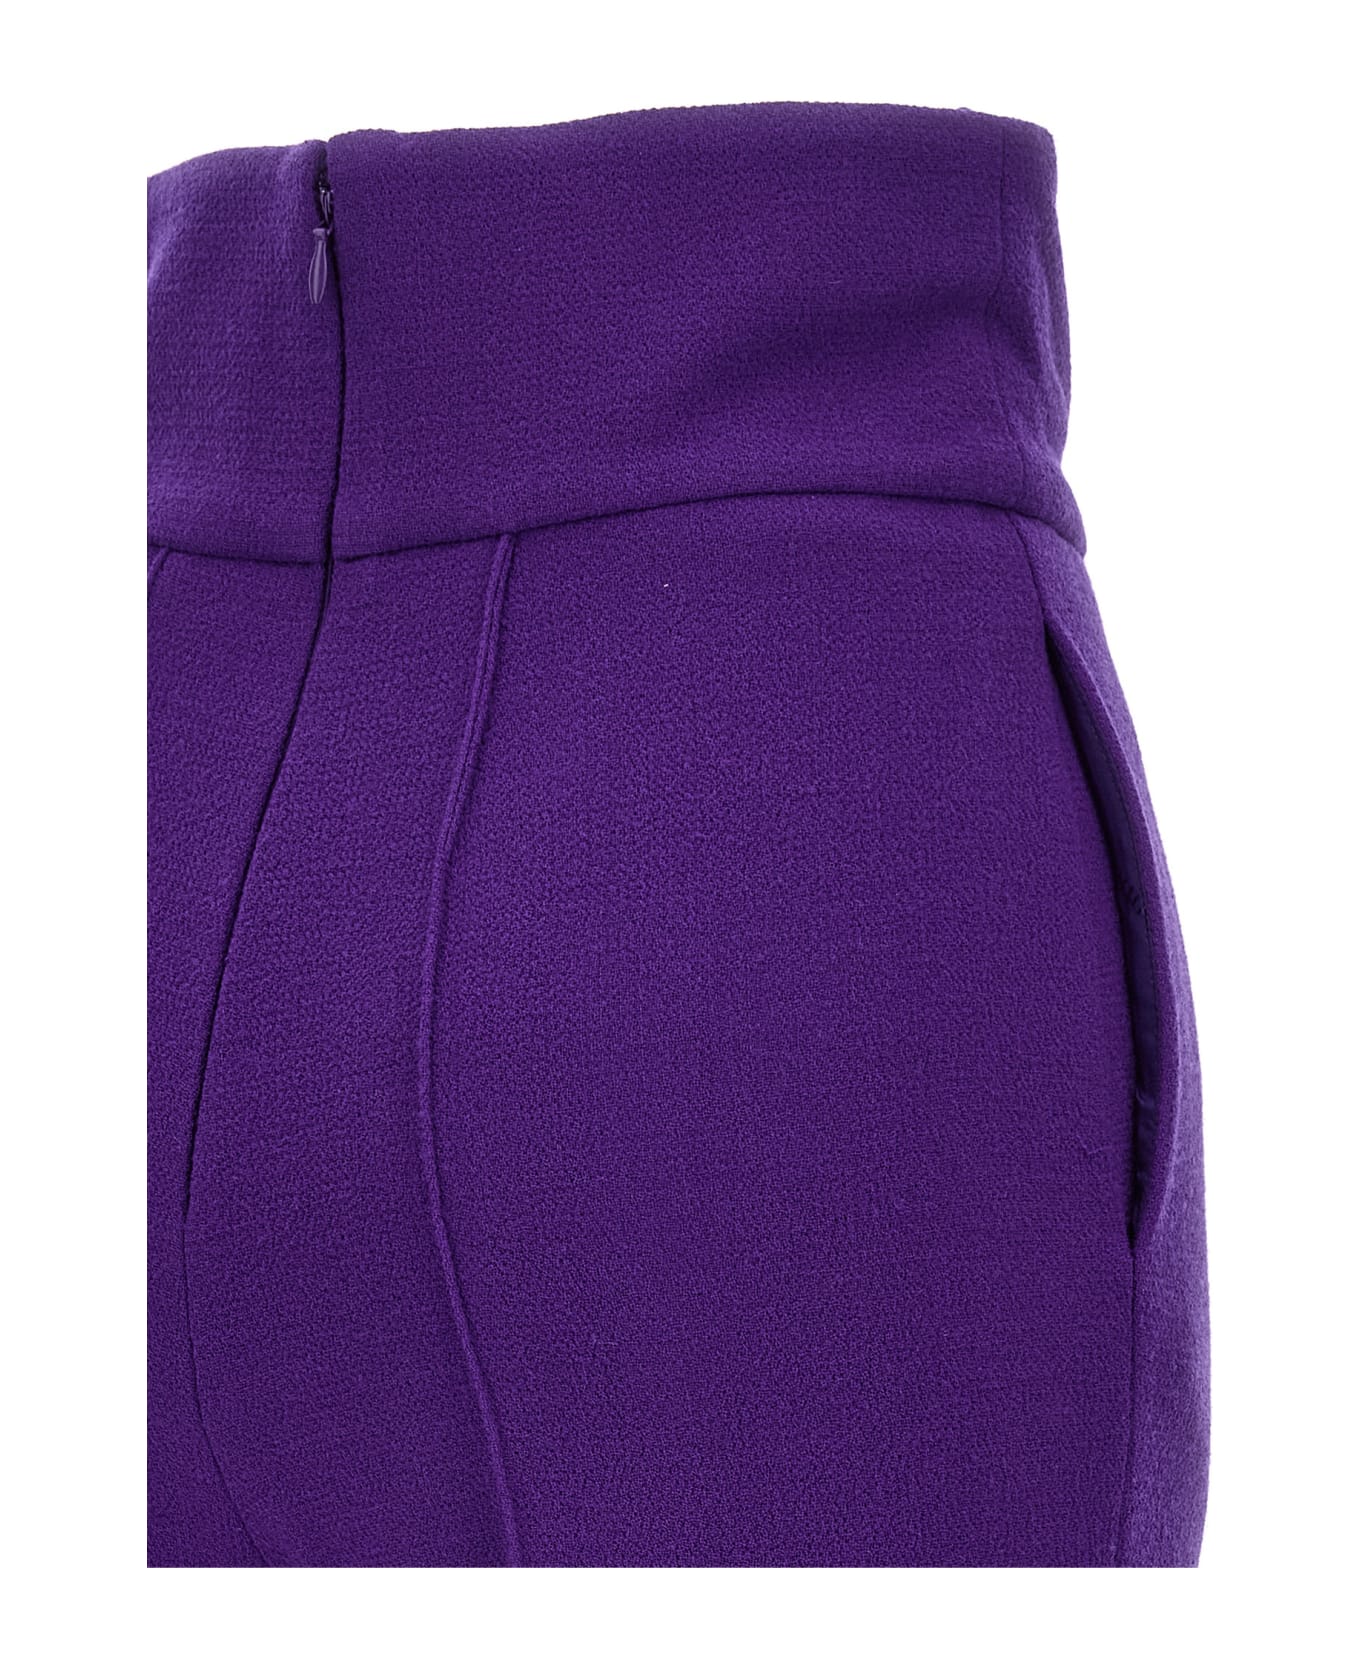 Alexandre Vauthier Tailored Trousers - Purple ボトムス